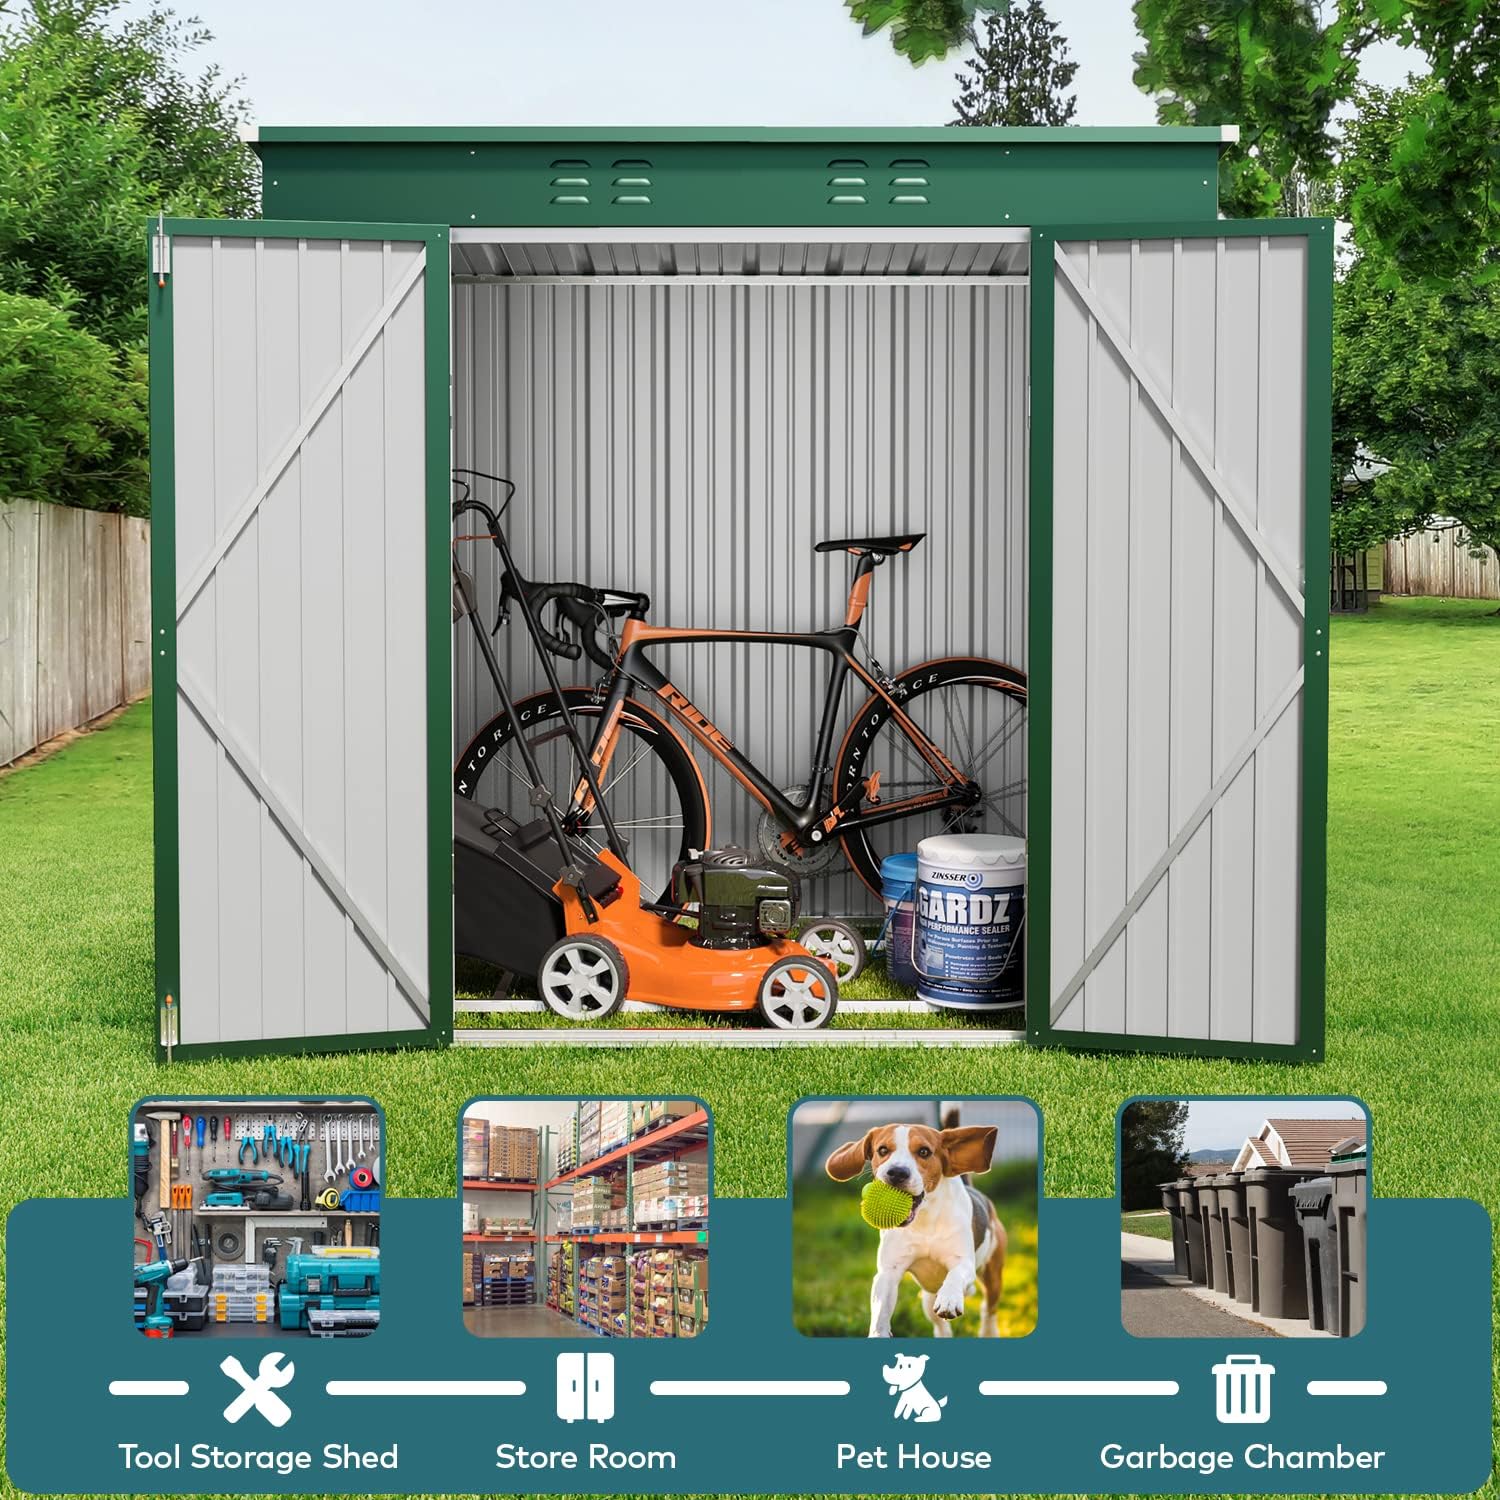 Outdoor Storage Shed, 6' x 4' Outdoor Storage Shed Clearance for Backyard Patio Lawn, Waterproof Metal Shed Outdoor Storage with Double Lockable Doors and Base Frame, Green - image 3 of 8